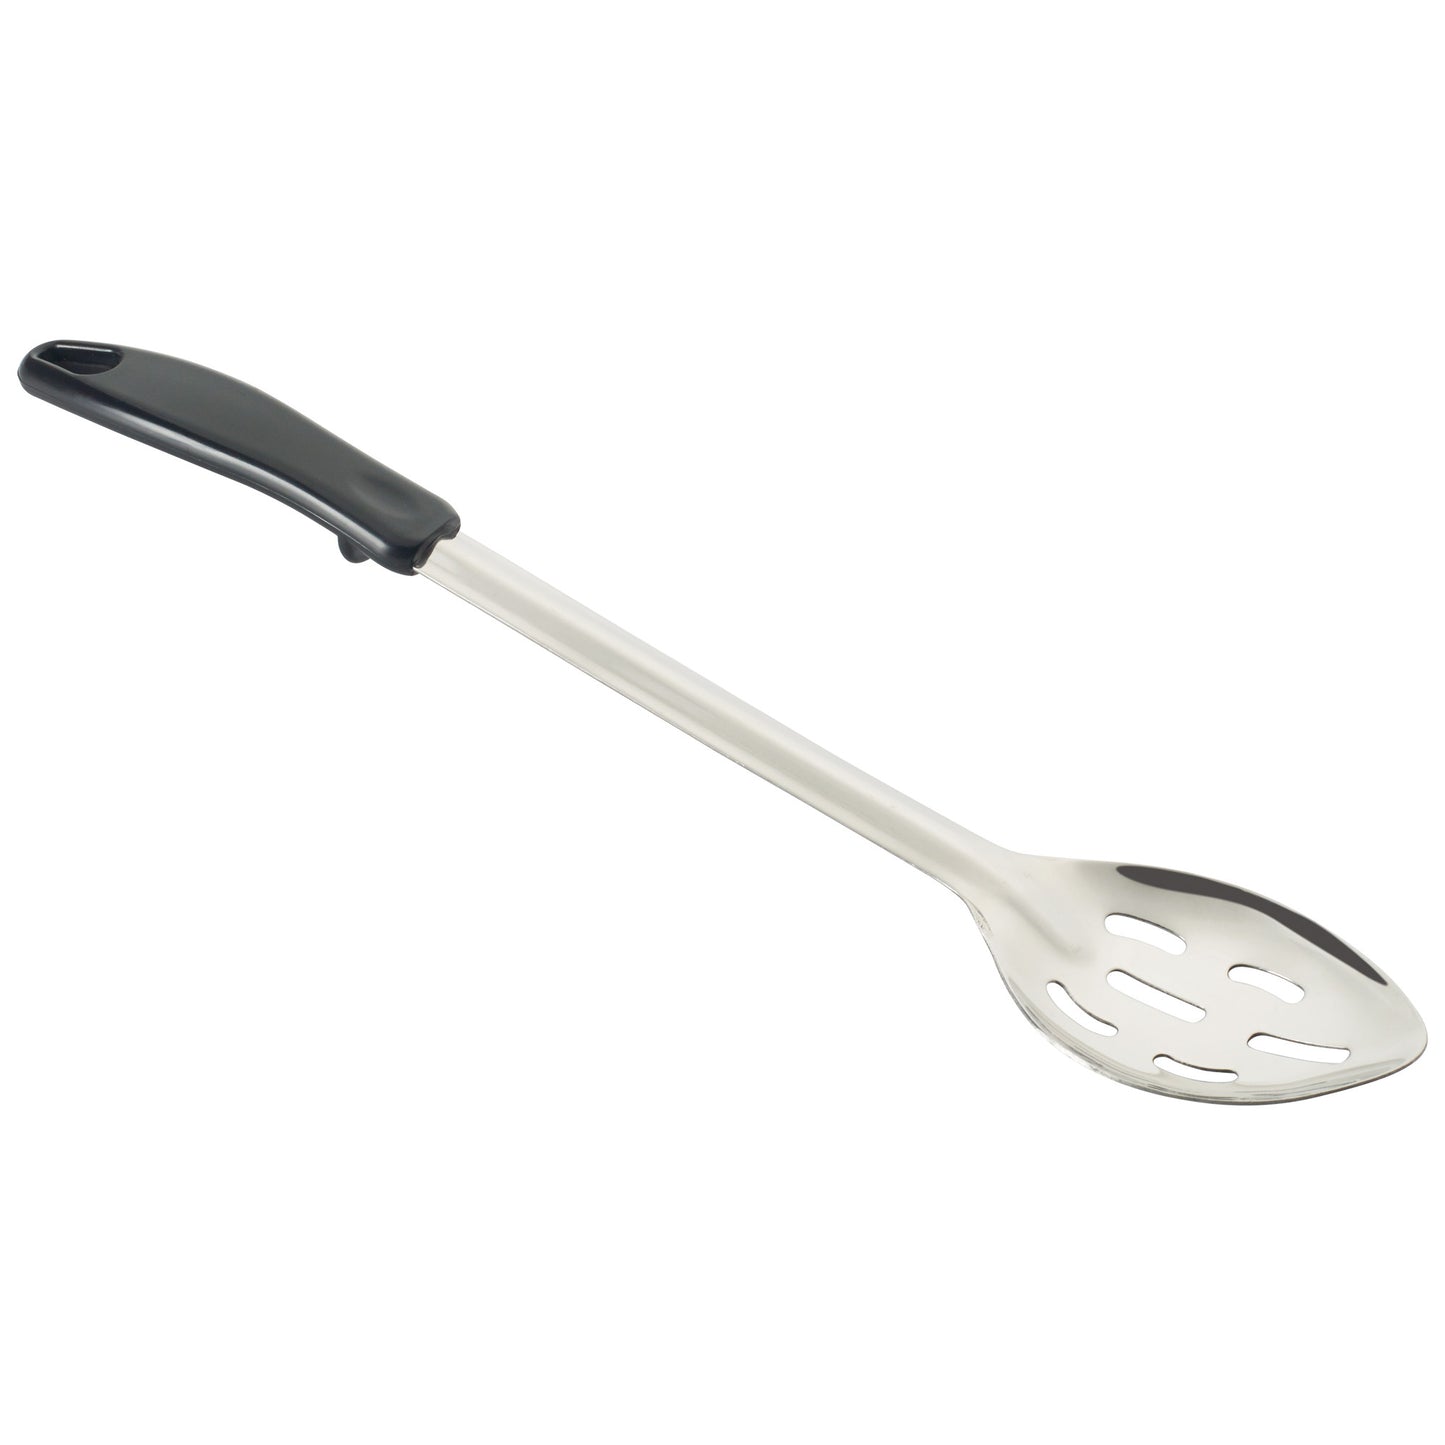 BHSP-15 - Basting Spoon with Stop-Hook Polypropylene Handle - Slotted, 15"